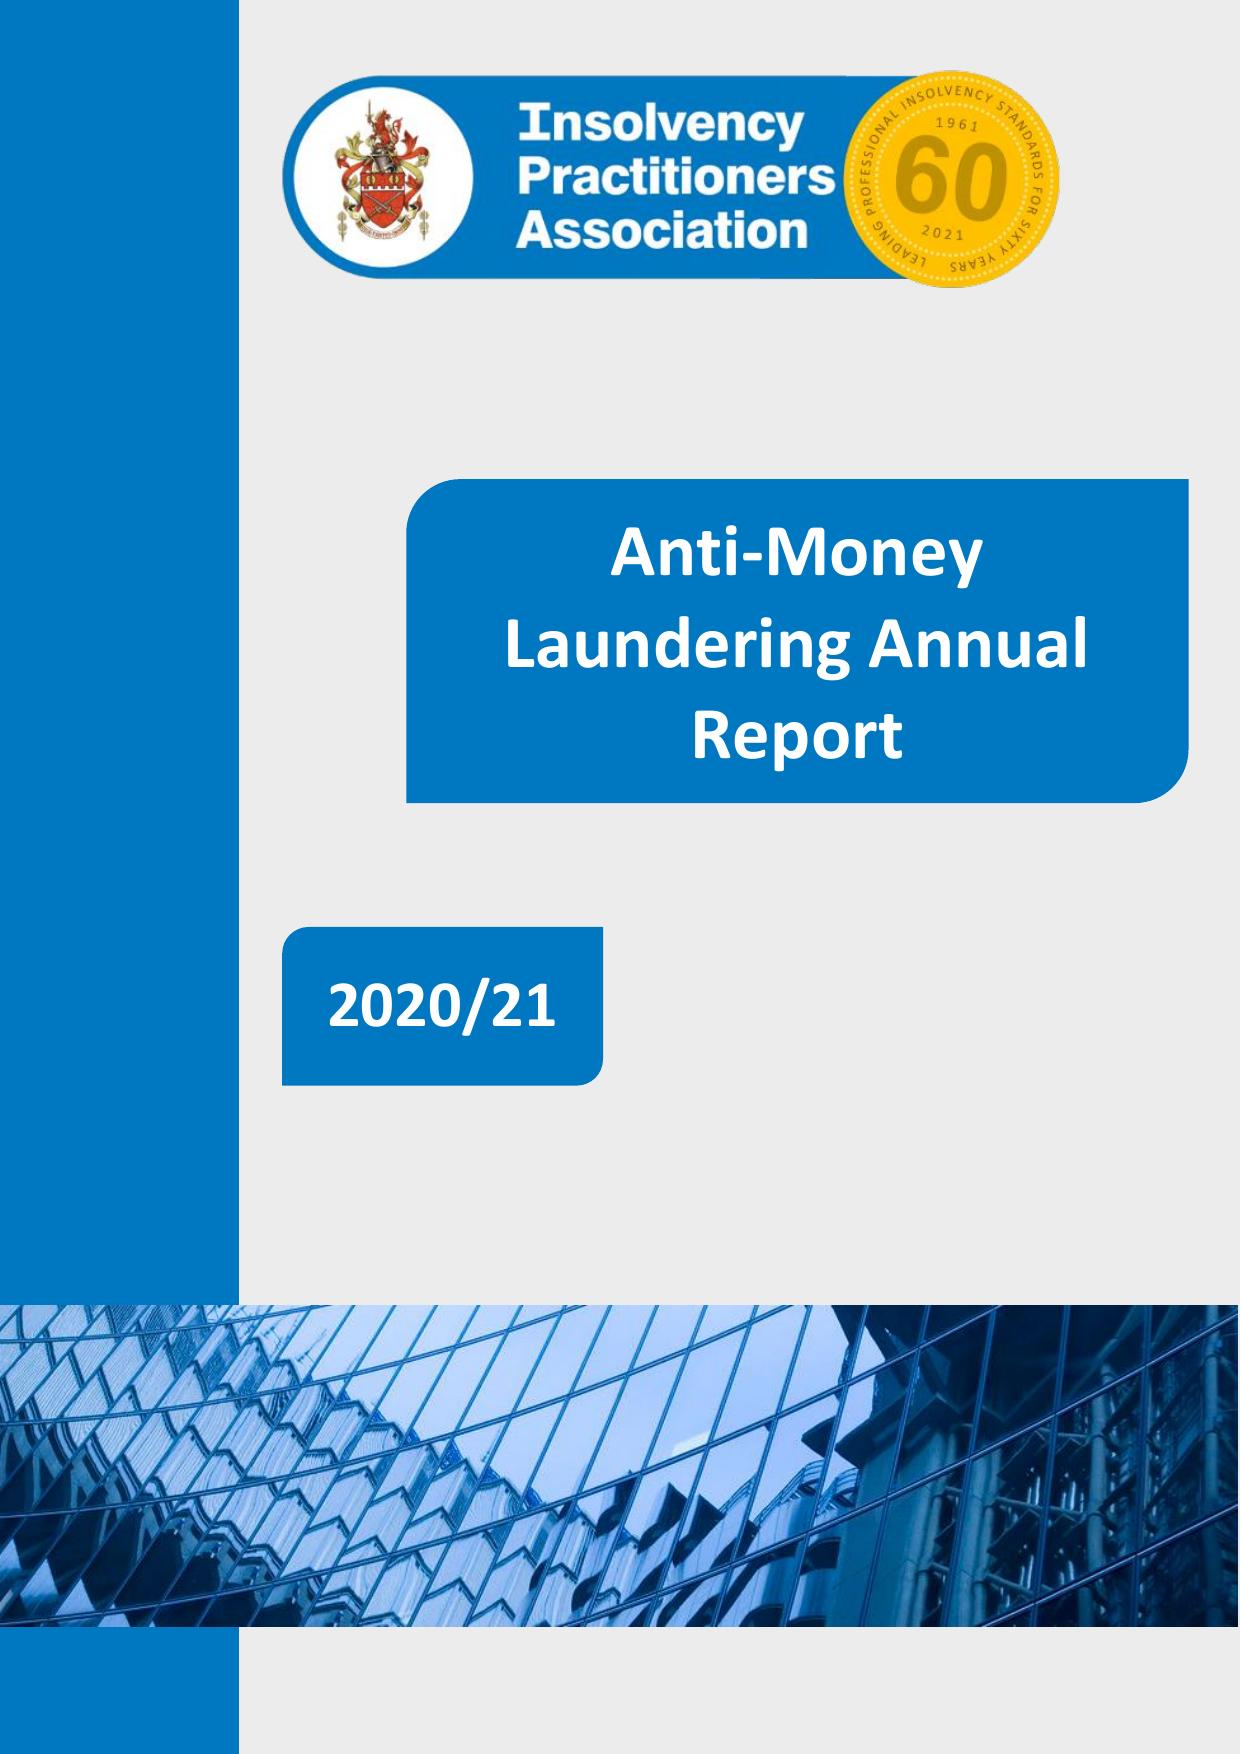 INSOLVENCY-PRACTITIONERS.ORG.UK 2021 Annual Report